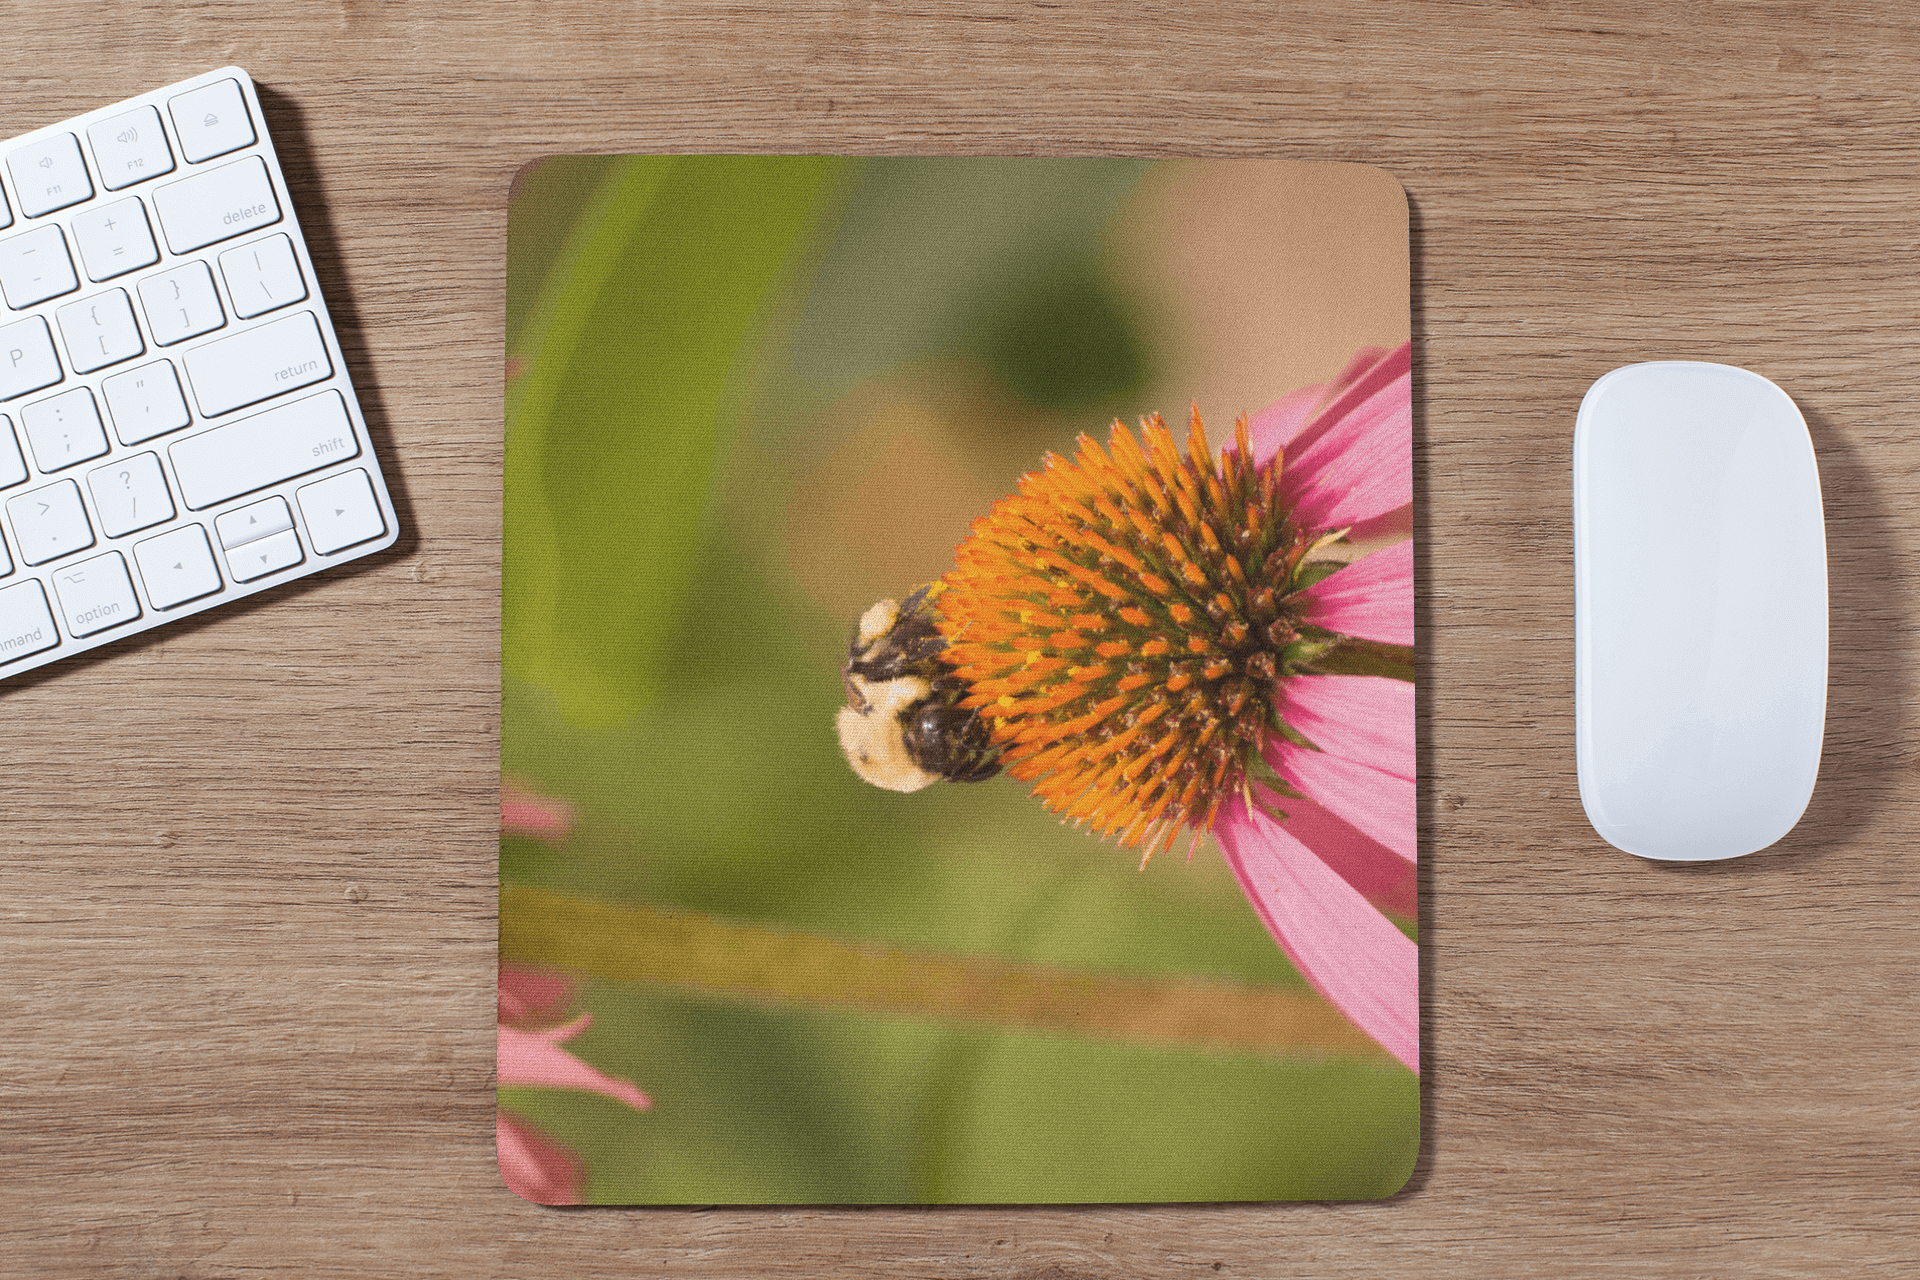 Bee on a cone flower - Mouse pad bee cone flower flower honey bee nature nature mouse pad nature photo worker bee